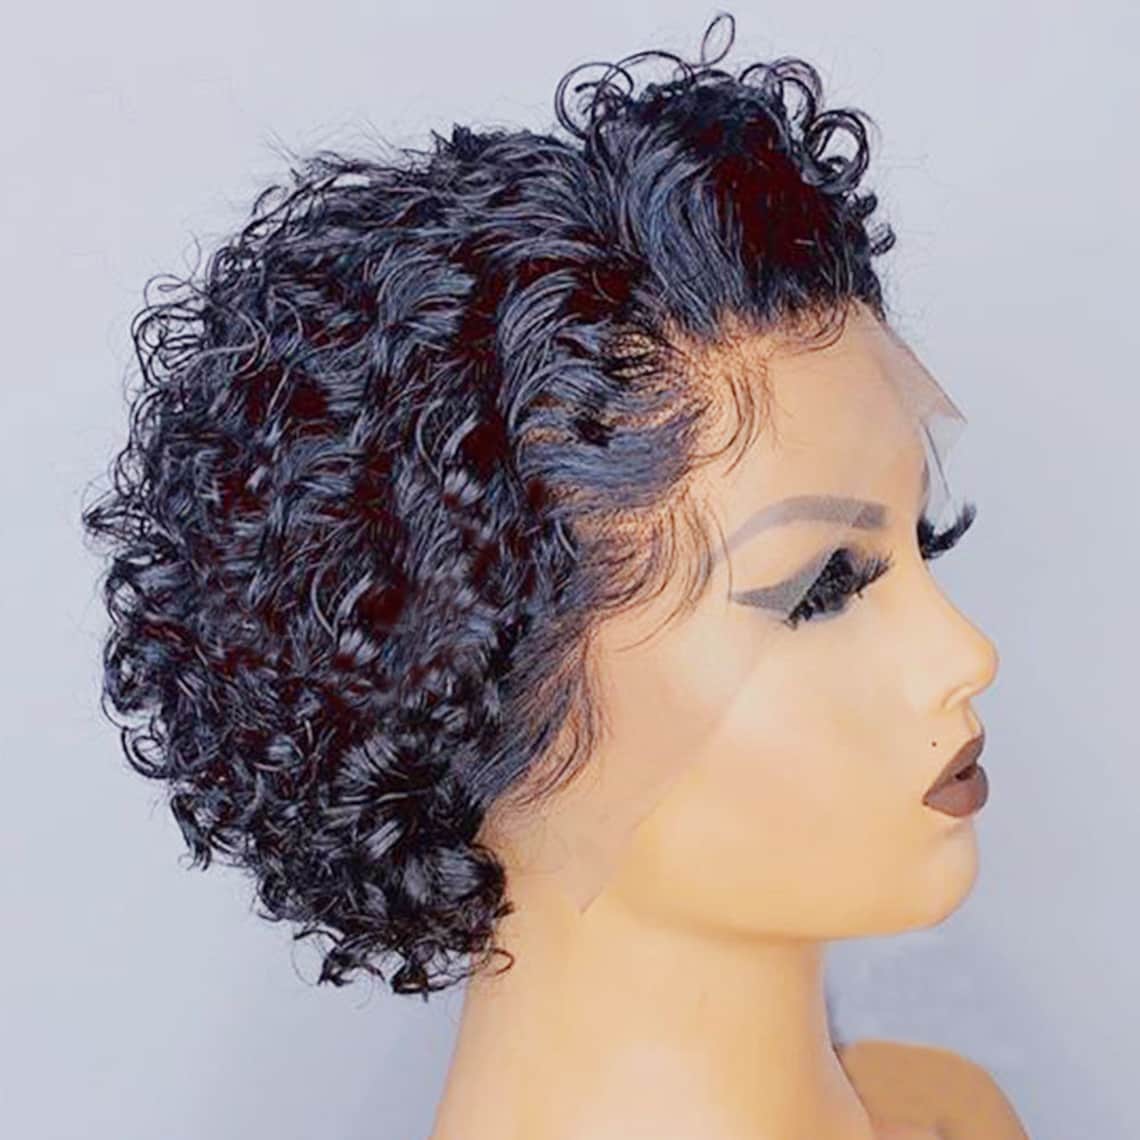 Pixie Cut Wig For Black Women Short Curly Human Hair Wig Etsy